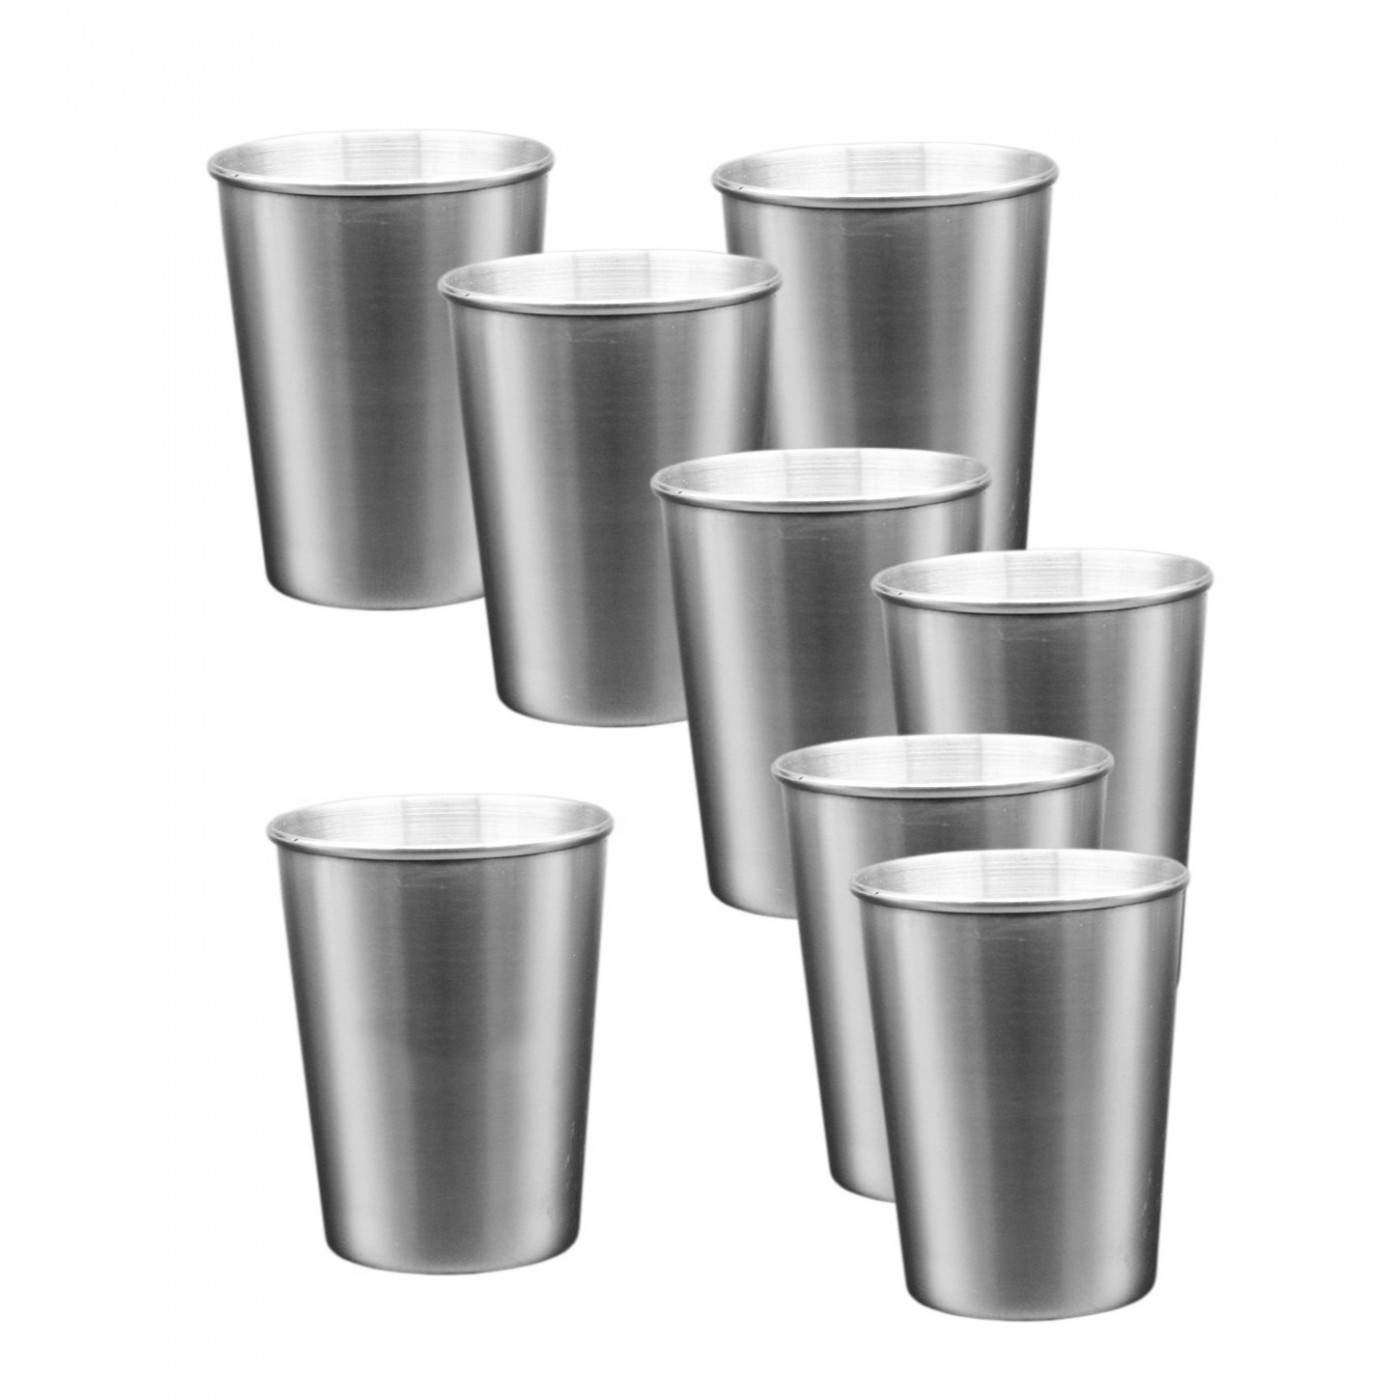 https://www.woodtoolsanddeco.com/9386-large_default/set-of-8-stainless-steel-cups-170-ml-with-rolled-edge.jpg